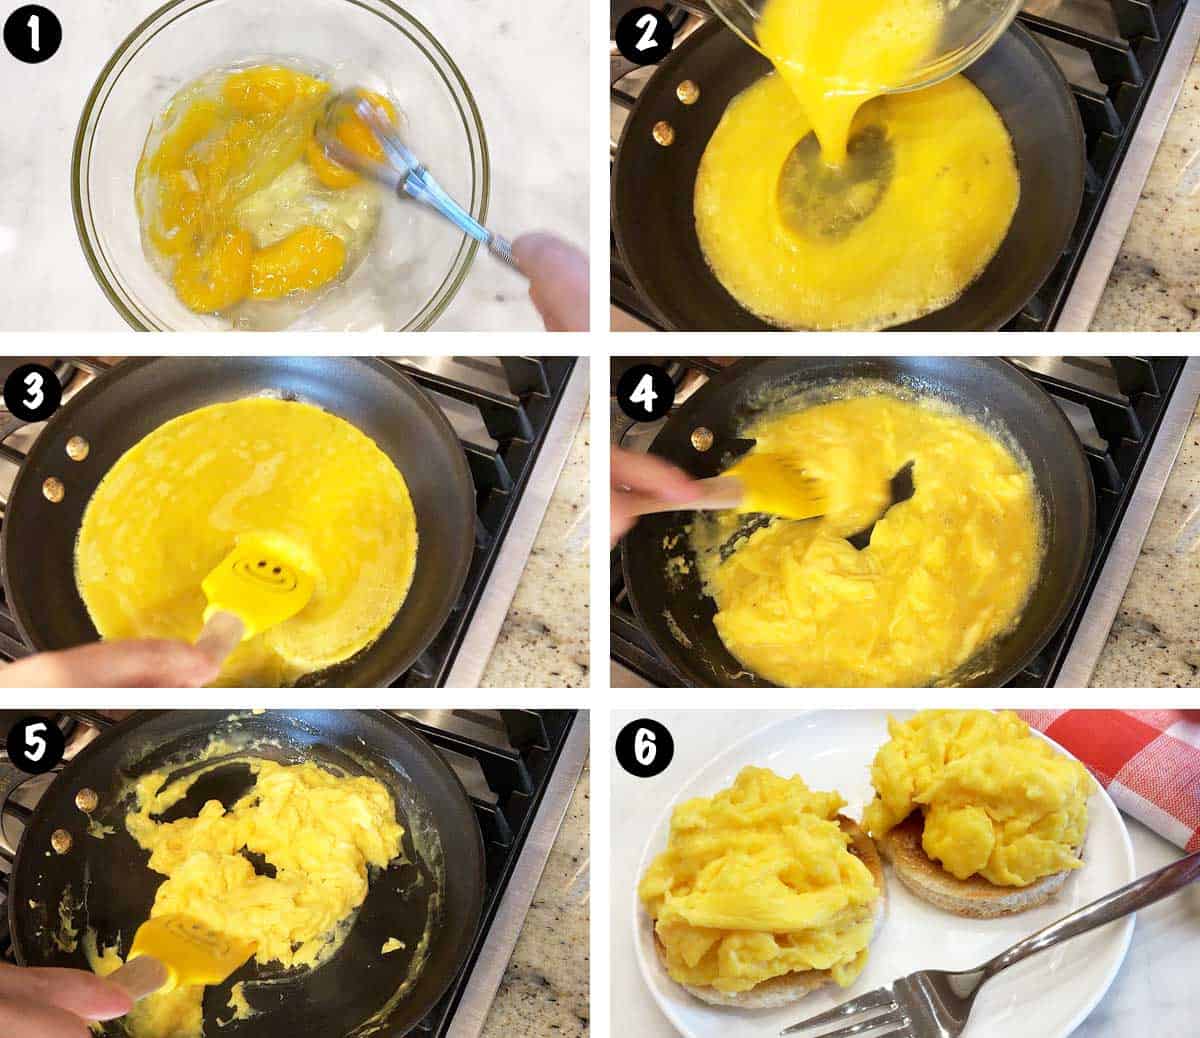 A photo collage showing the steps for cooking soft-scrambled eggs.